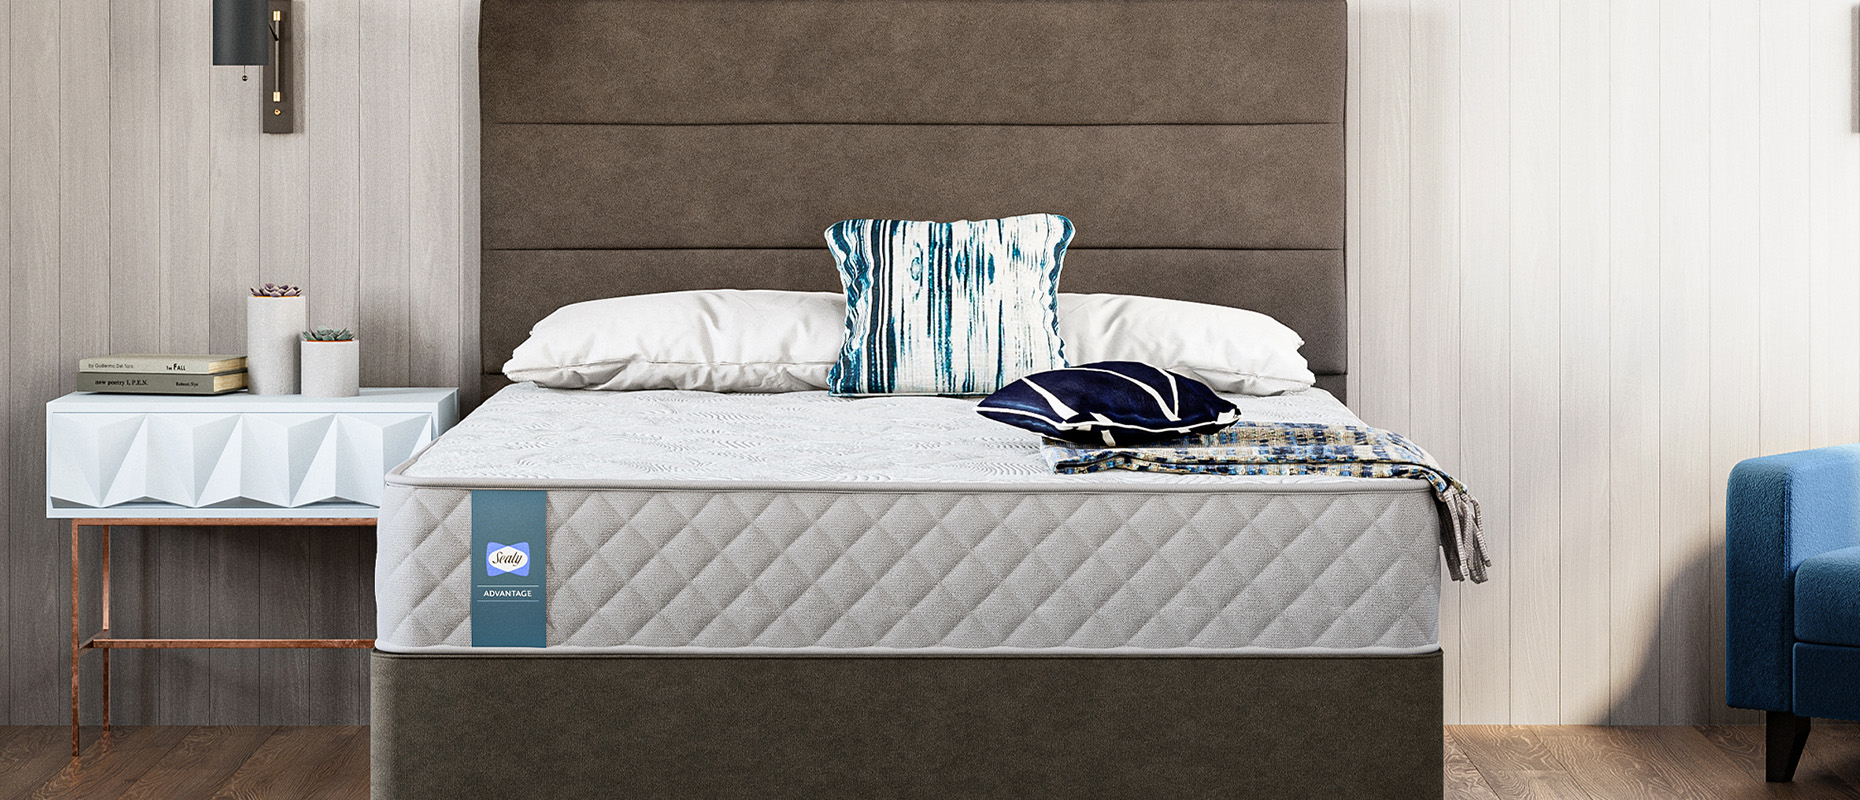 Albury Divan collection from Sealy at Forrest Furnishing